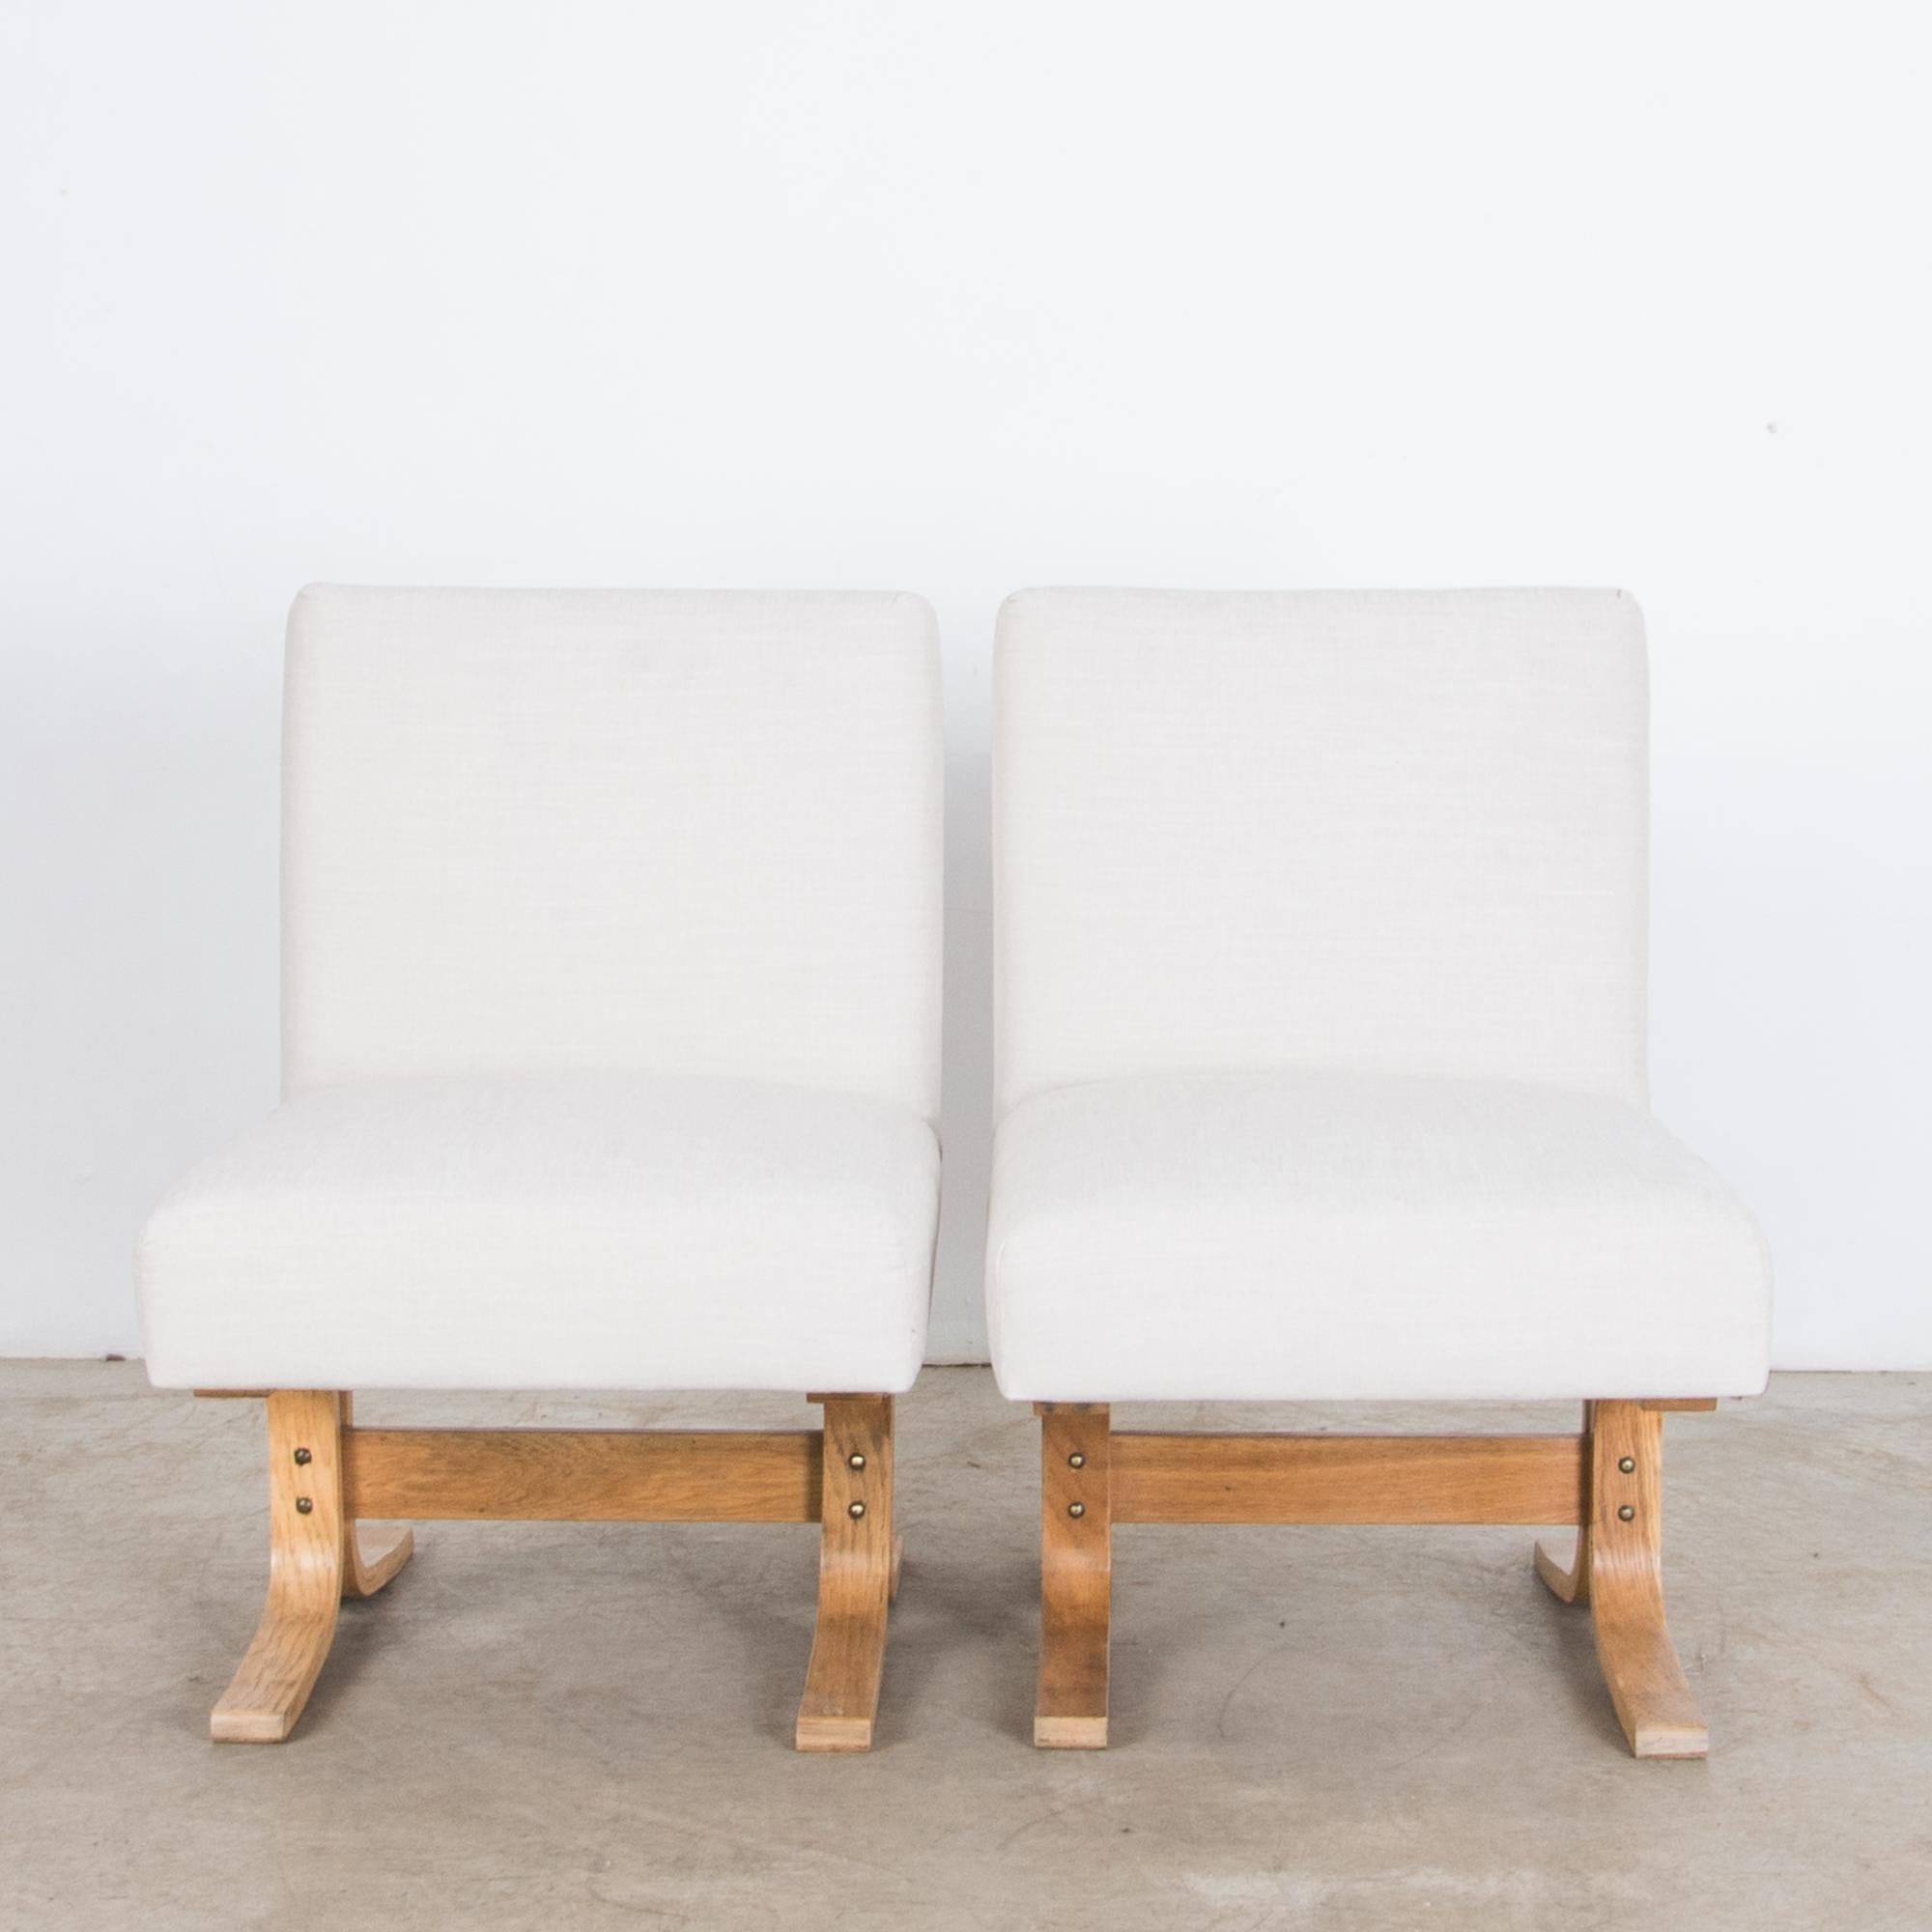 A pair of low slipper style pairs from Czech Republic, circa 1960. Composed of basic forms, a soft cushion rests on a bent hardwood frame. A contrasts of textures and colors, curves and straight lines, casual seating in typical Mid-Century Modern